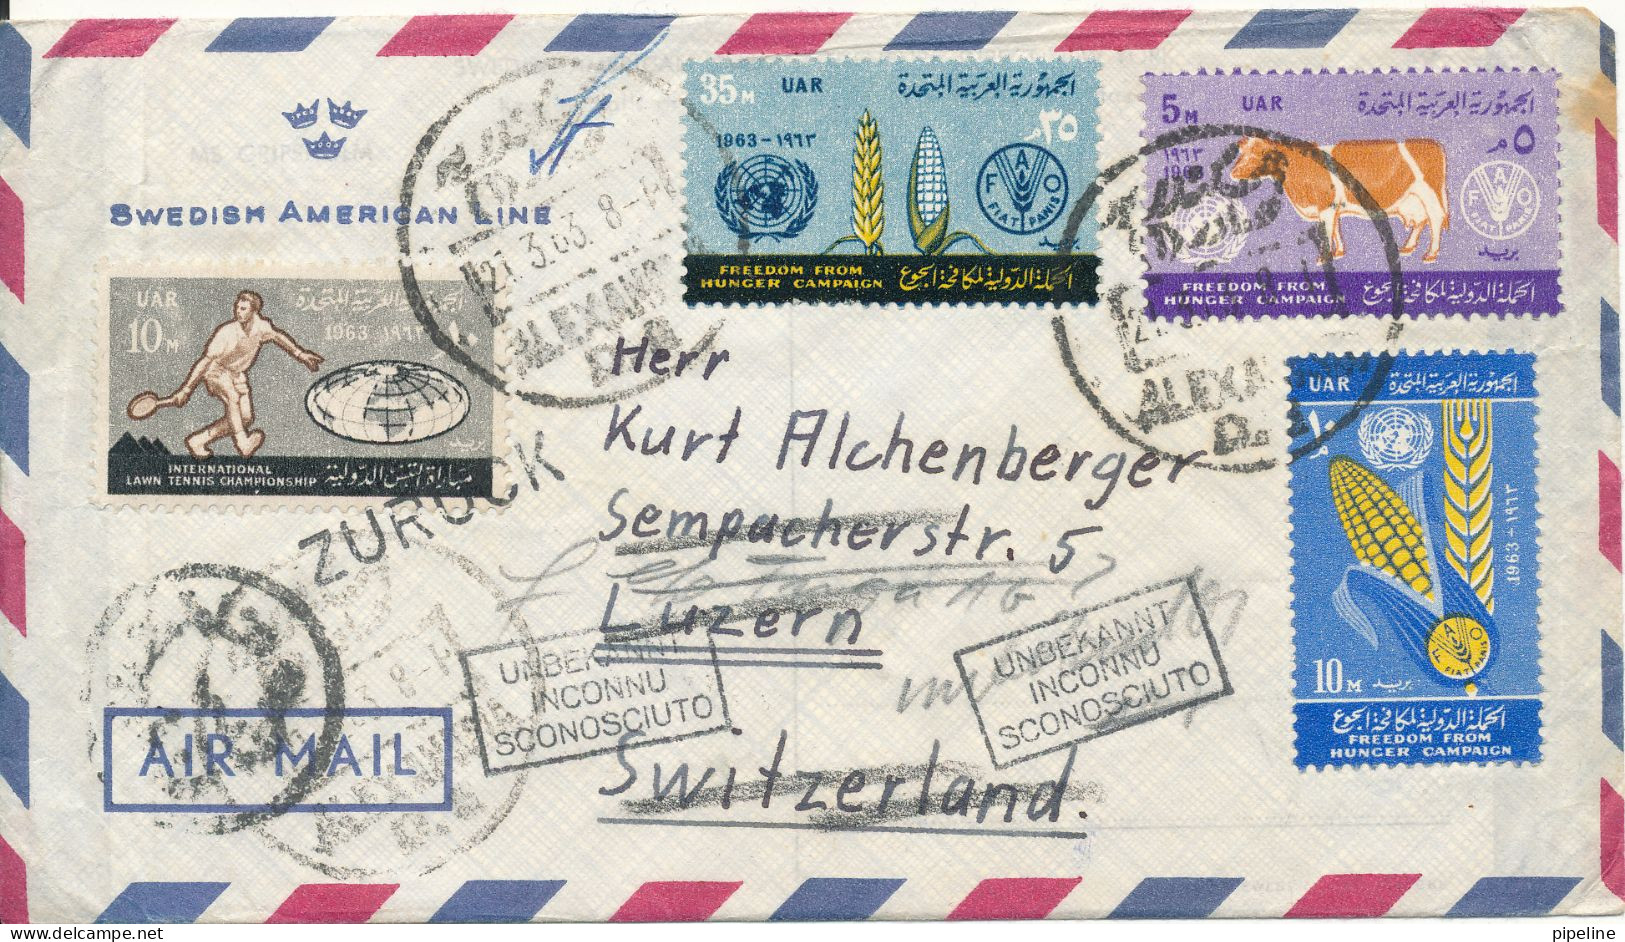 UAR Egypt Air Mail Cover Sent To Switzerland 21-3-1963 And Returned Because Of Unknown Address (Swedish American Line) - Luchtpost